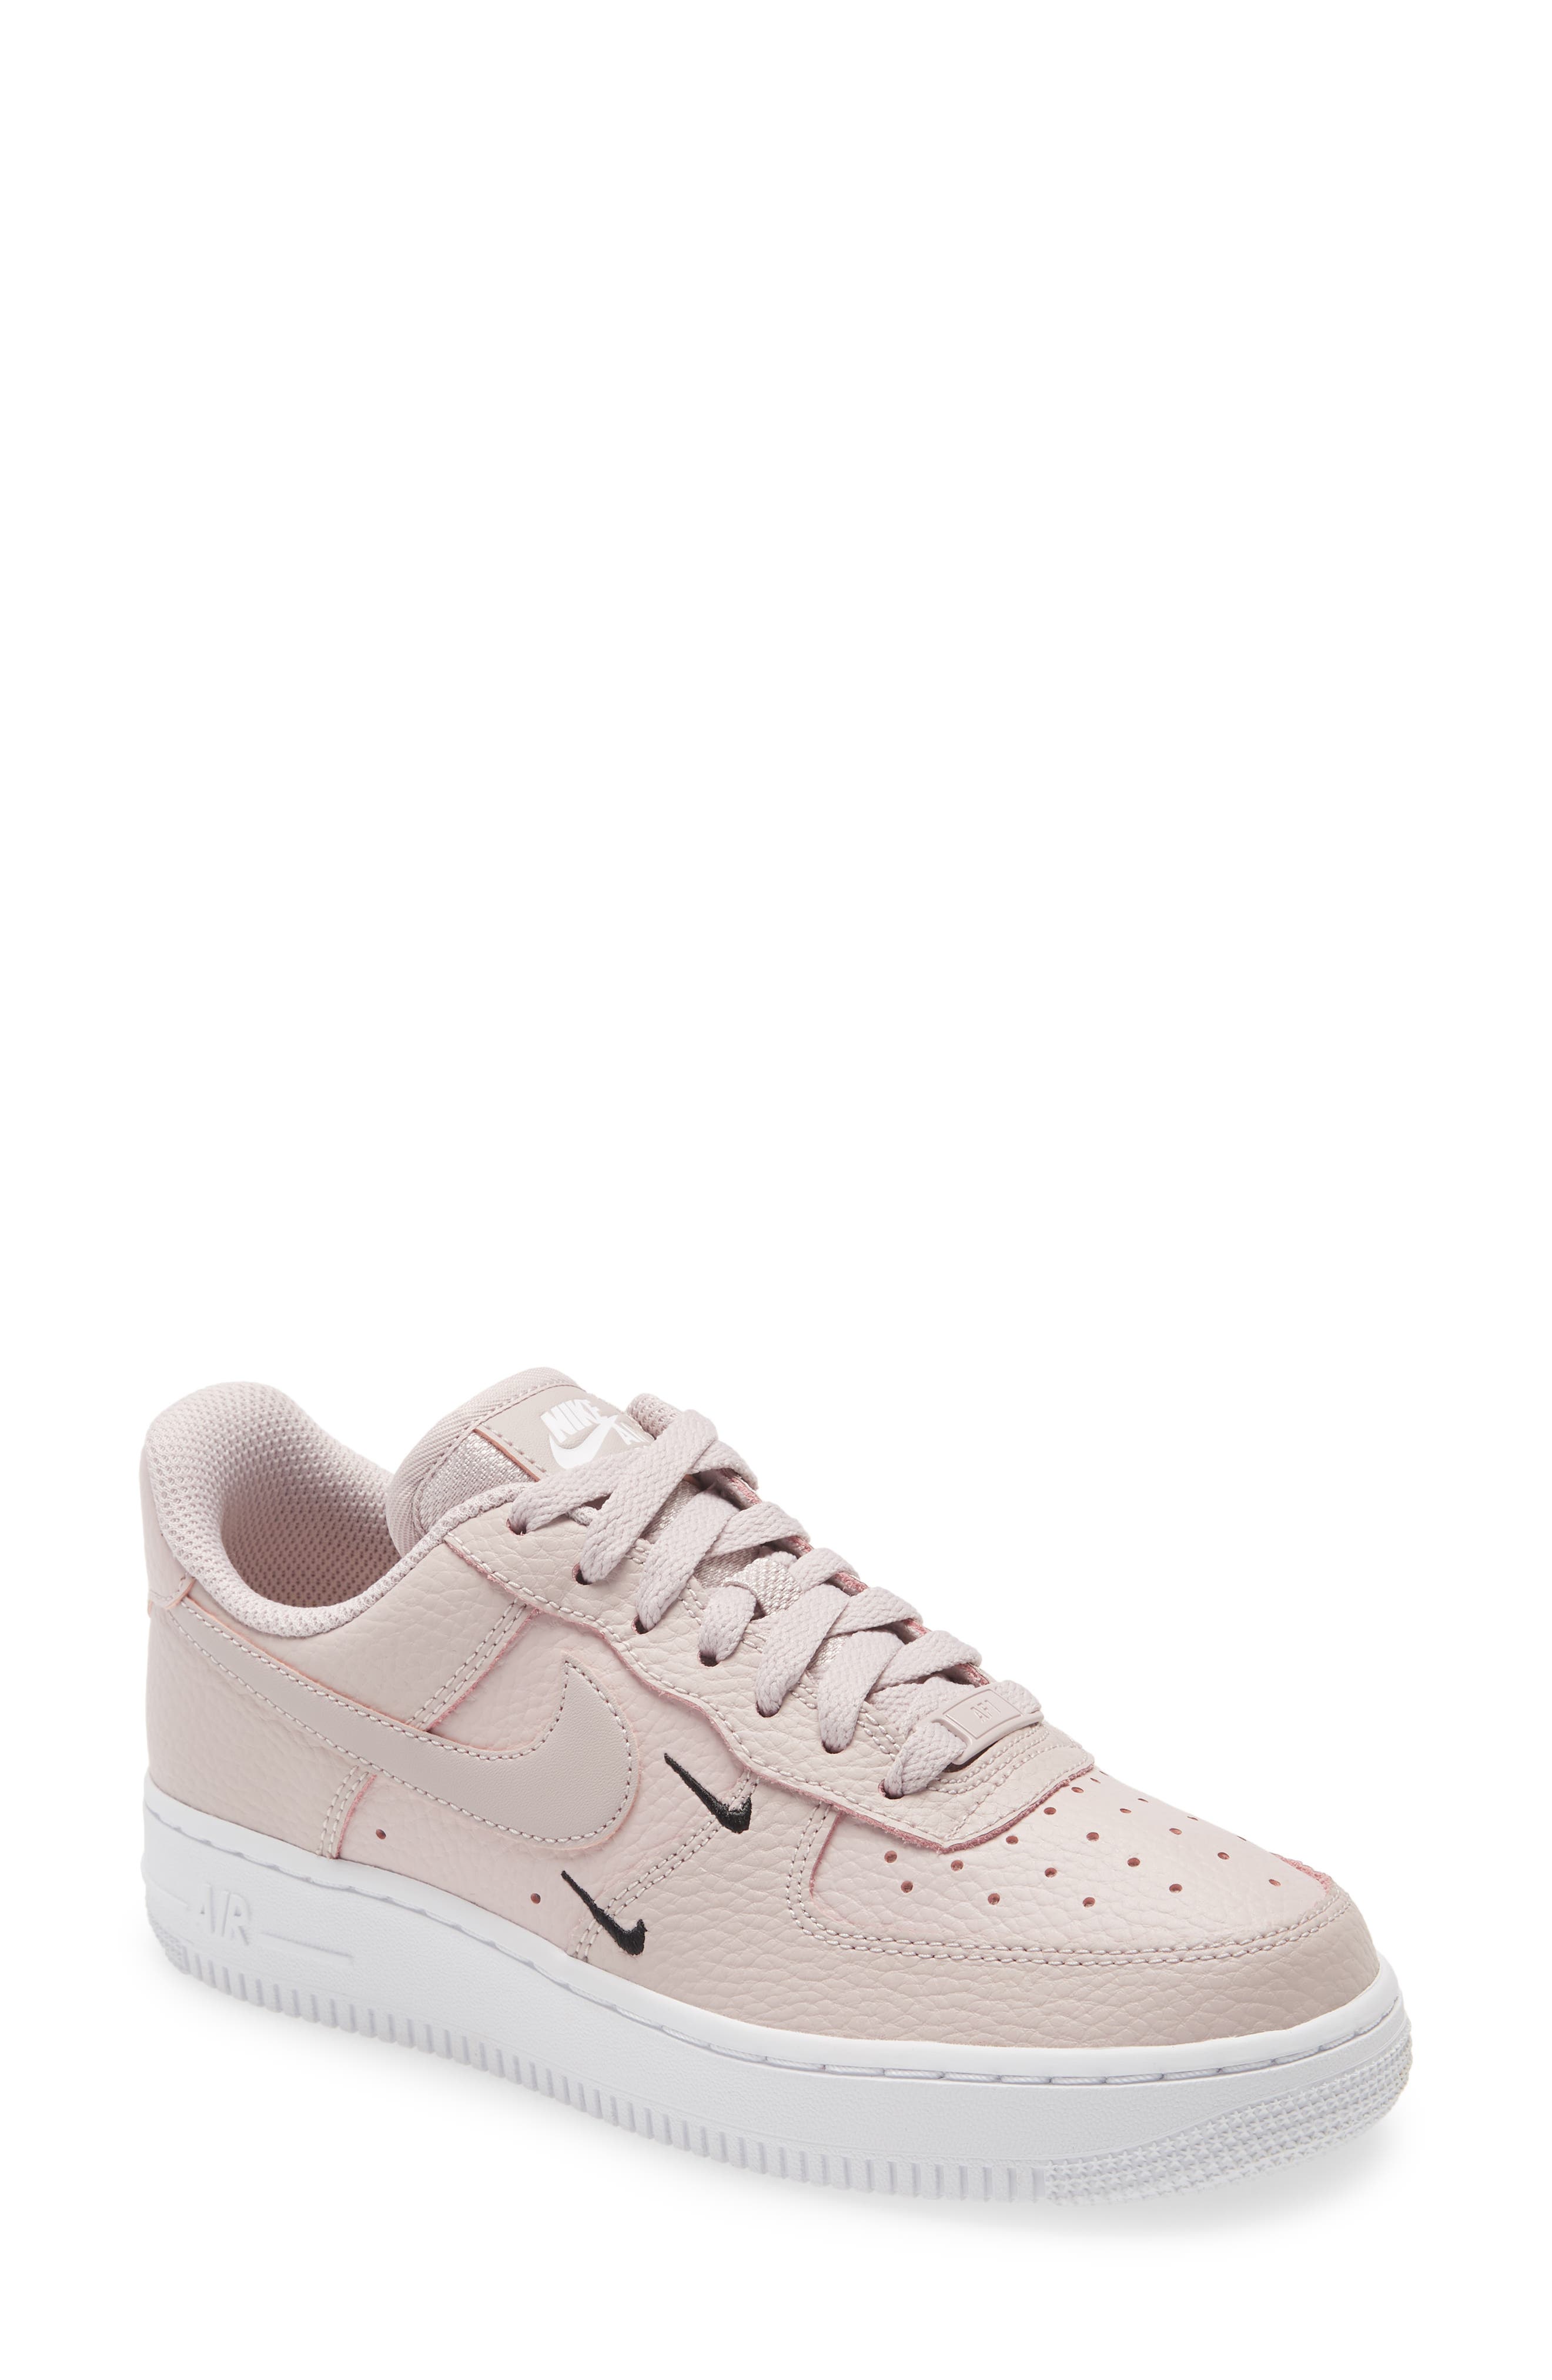 nike air force women's nordstrom